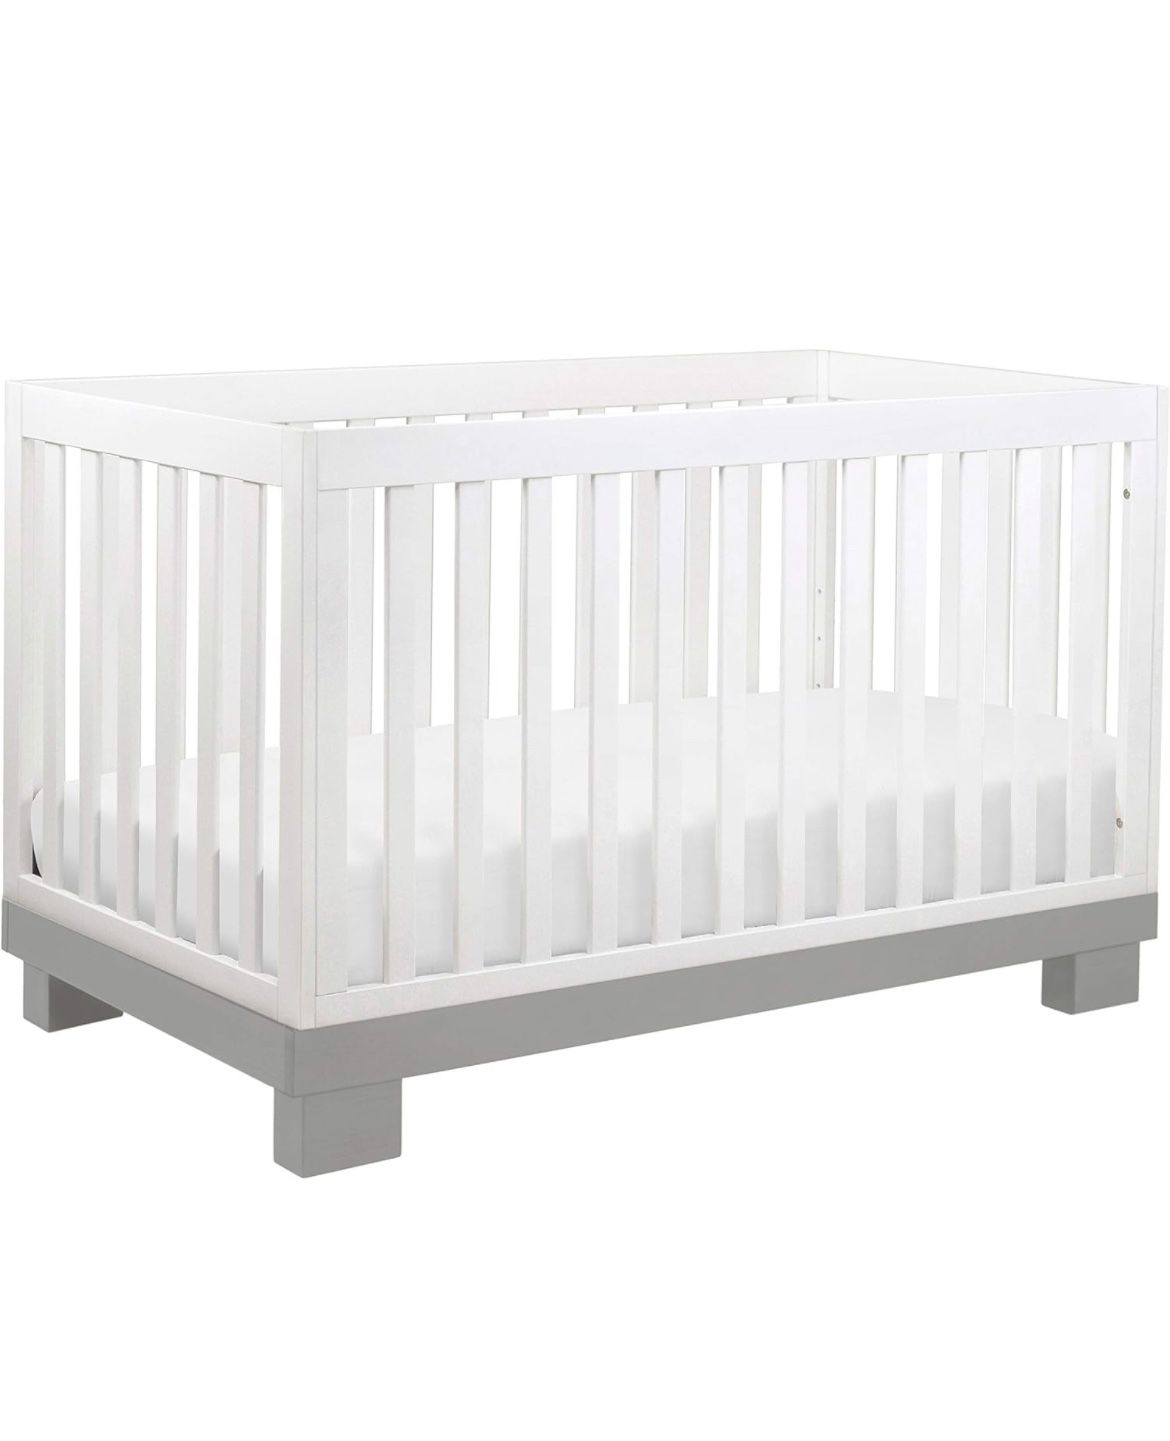 Babyletto Modo 3-in-1 Convertible Crib with Toddler Bed Conversion Kit in Grey and White, Greenguard